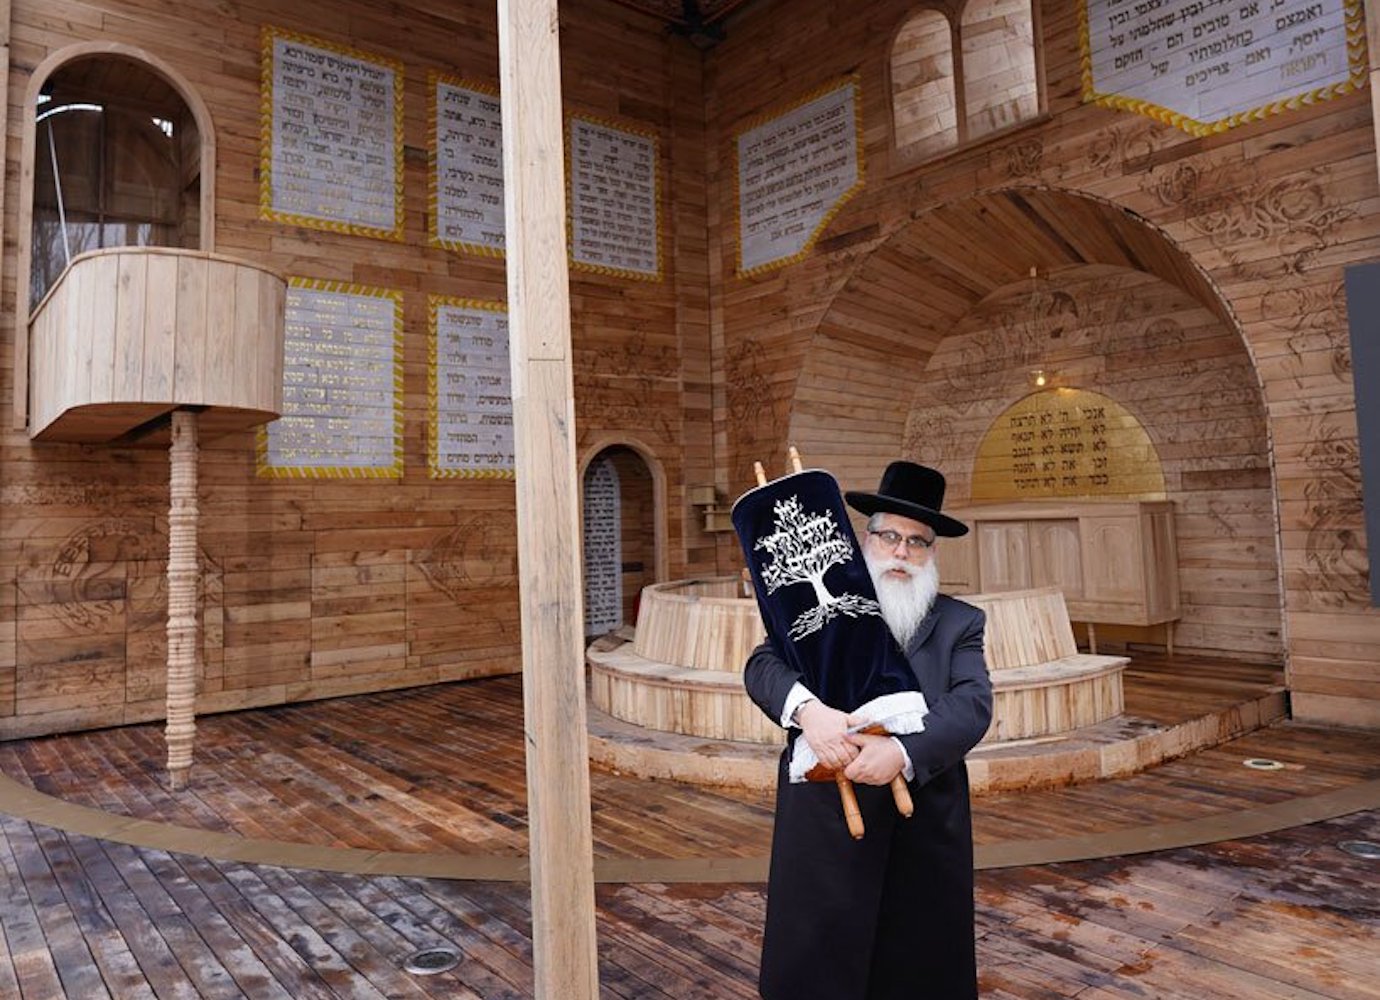 An innovative pop-up synagogue in Ukraine pays tribute to Jewish communities